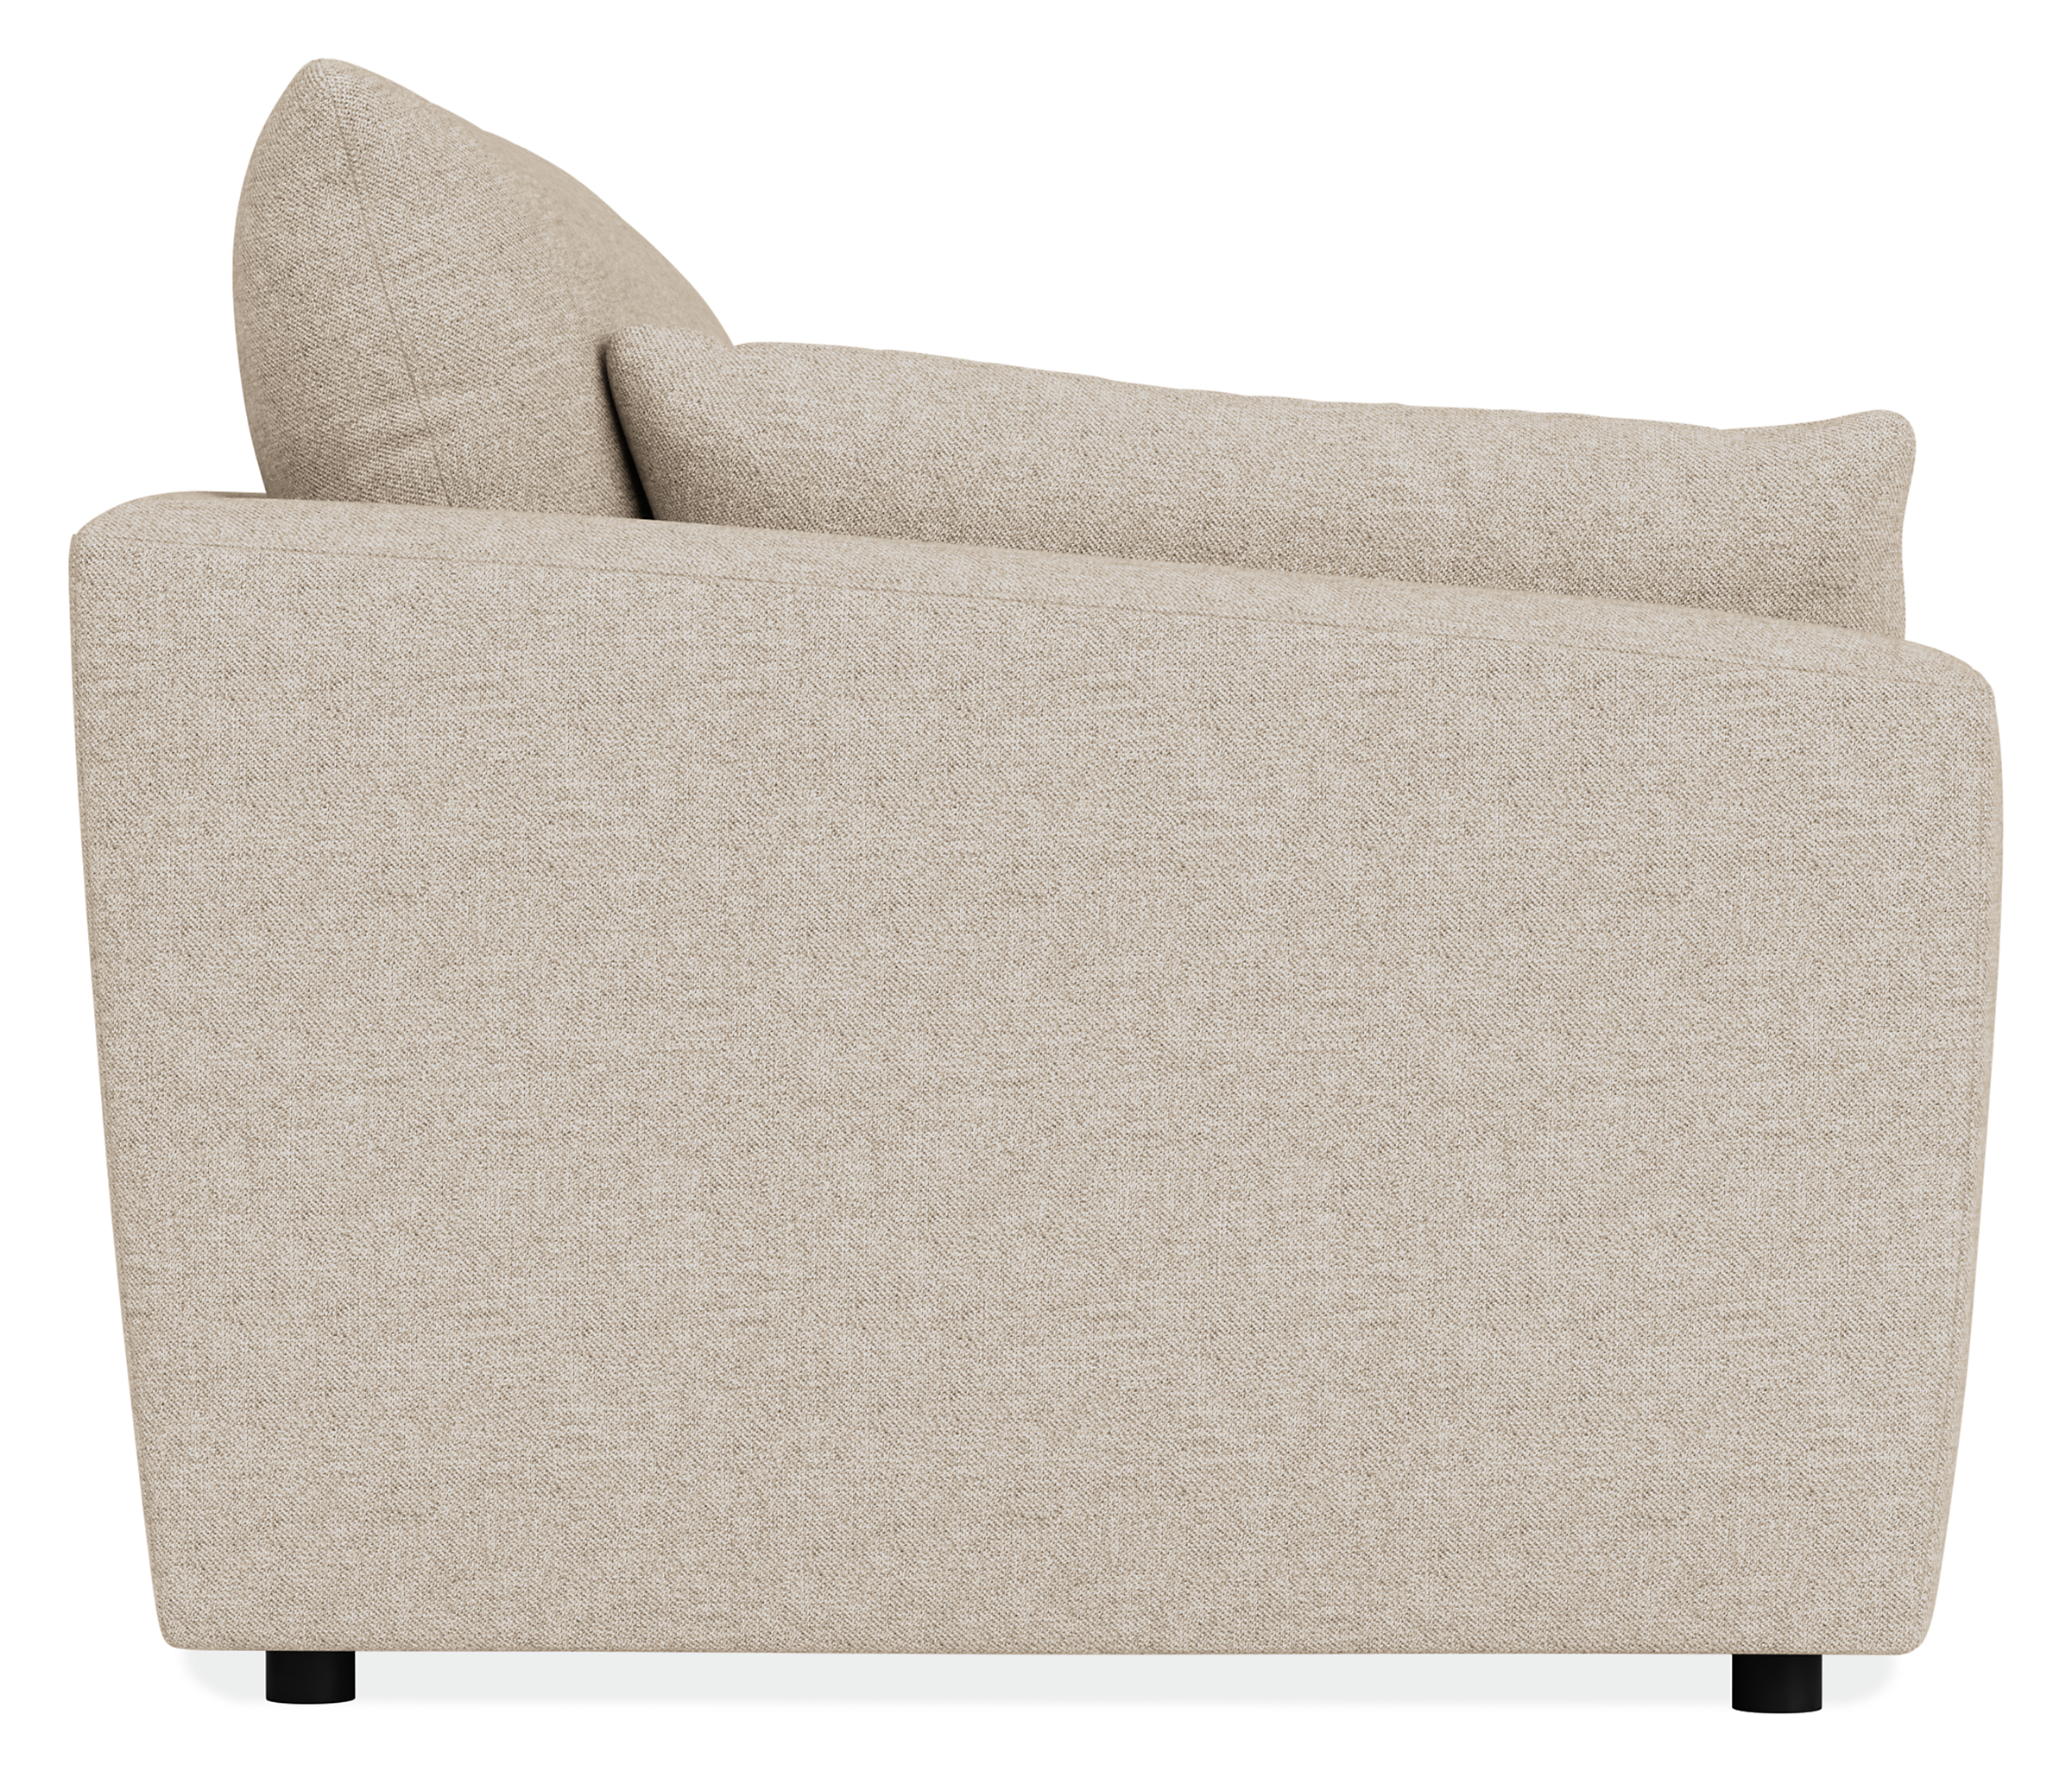 Side view of Weber 86-inch Sofa in Gino Oatmeal.